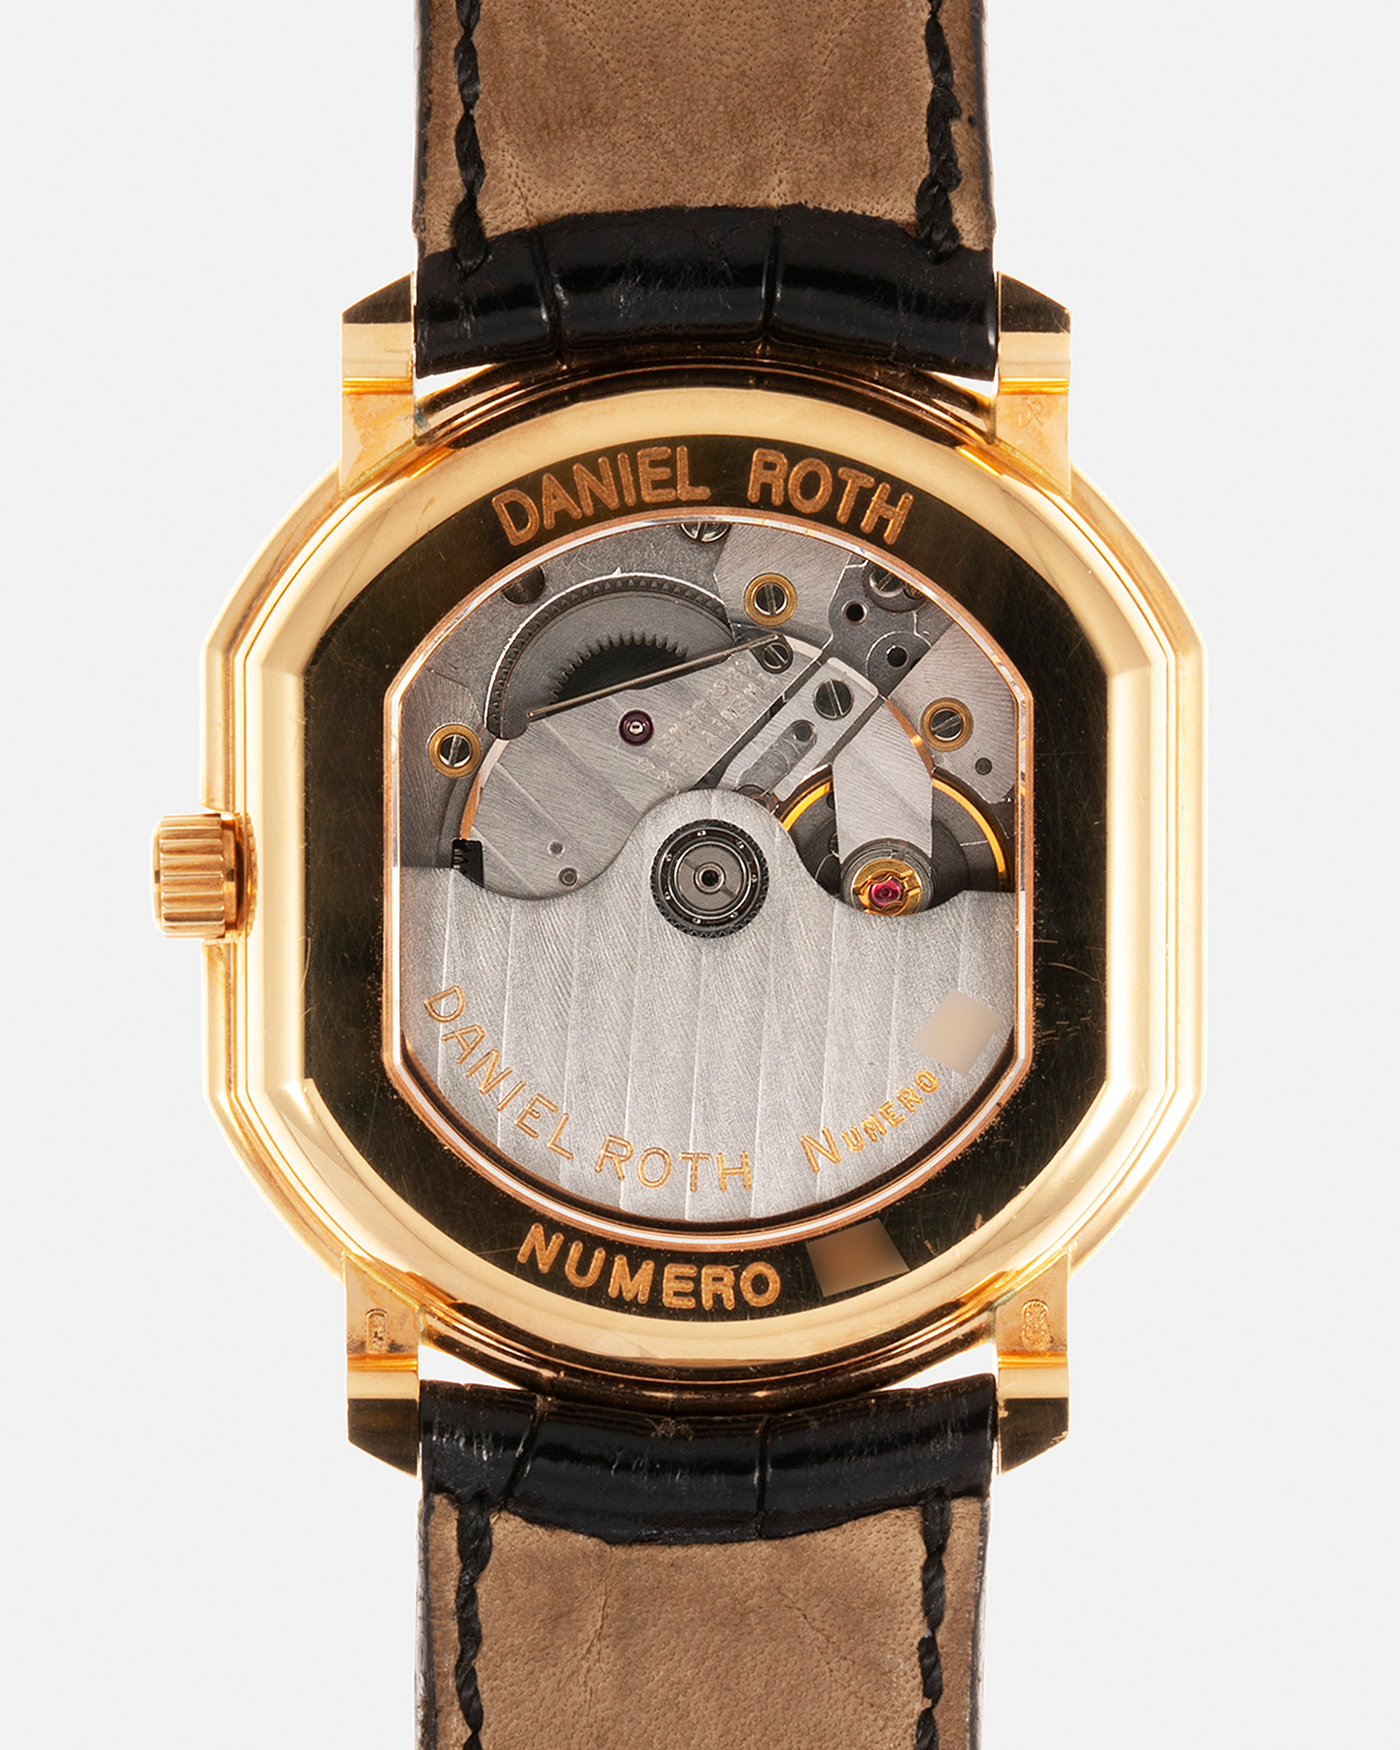 Brand: Daniel Roth Year: 1990’s Reference Number: 207/J1 Model: Seconds at Six Material: 18-carat Yellow Gold  Movement: Lemania Cal. 1918, Self-Winding Case Diameter: 35mm x 32mm Strap: Daniel Roth Black Alligator Leather Strap with Blancpain Signed 18-carat Yellow Gold Tang Buckle